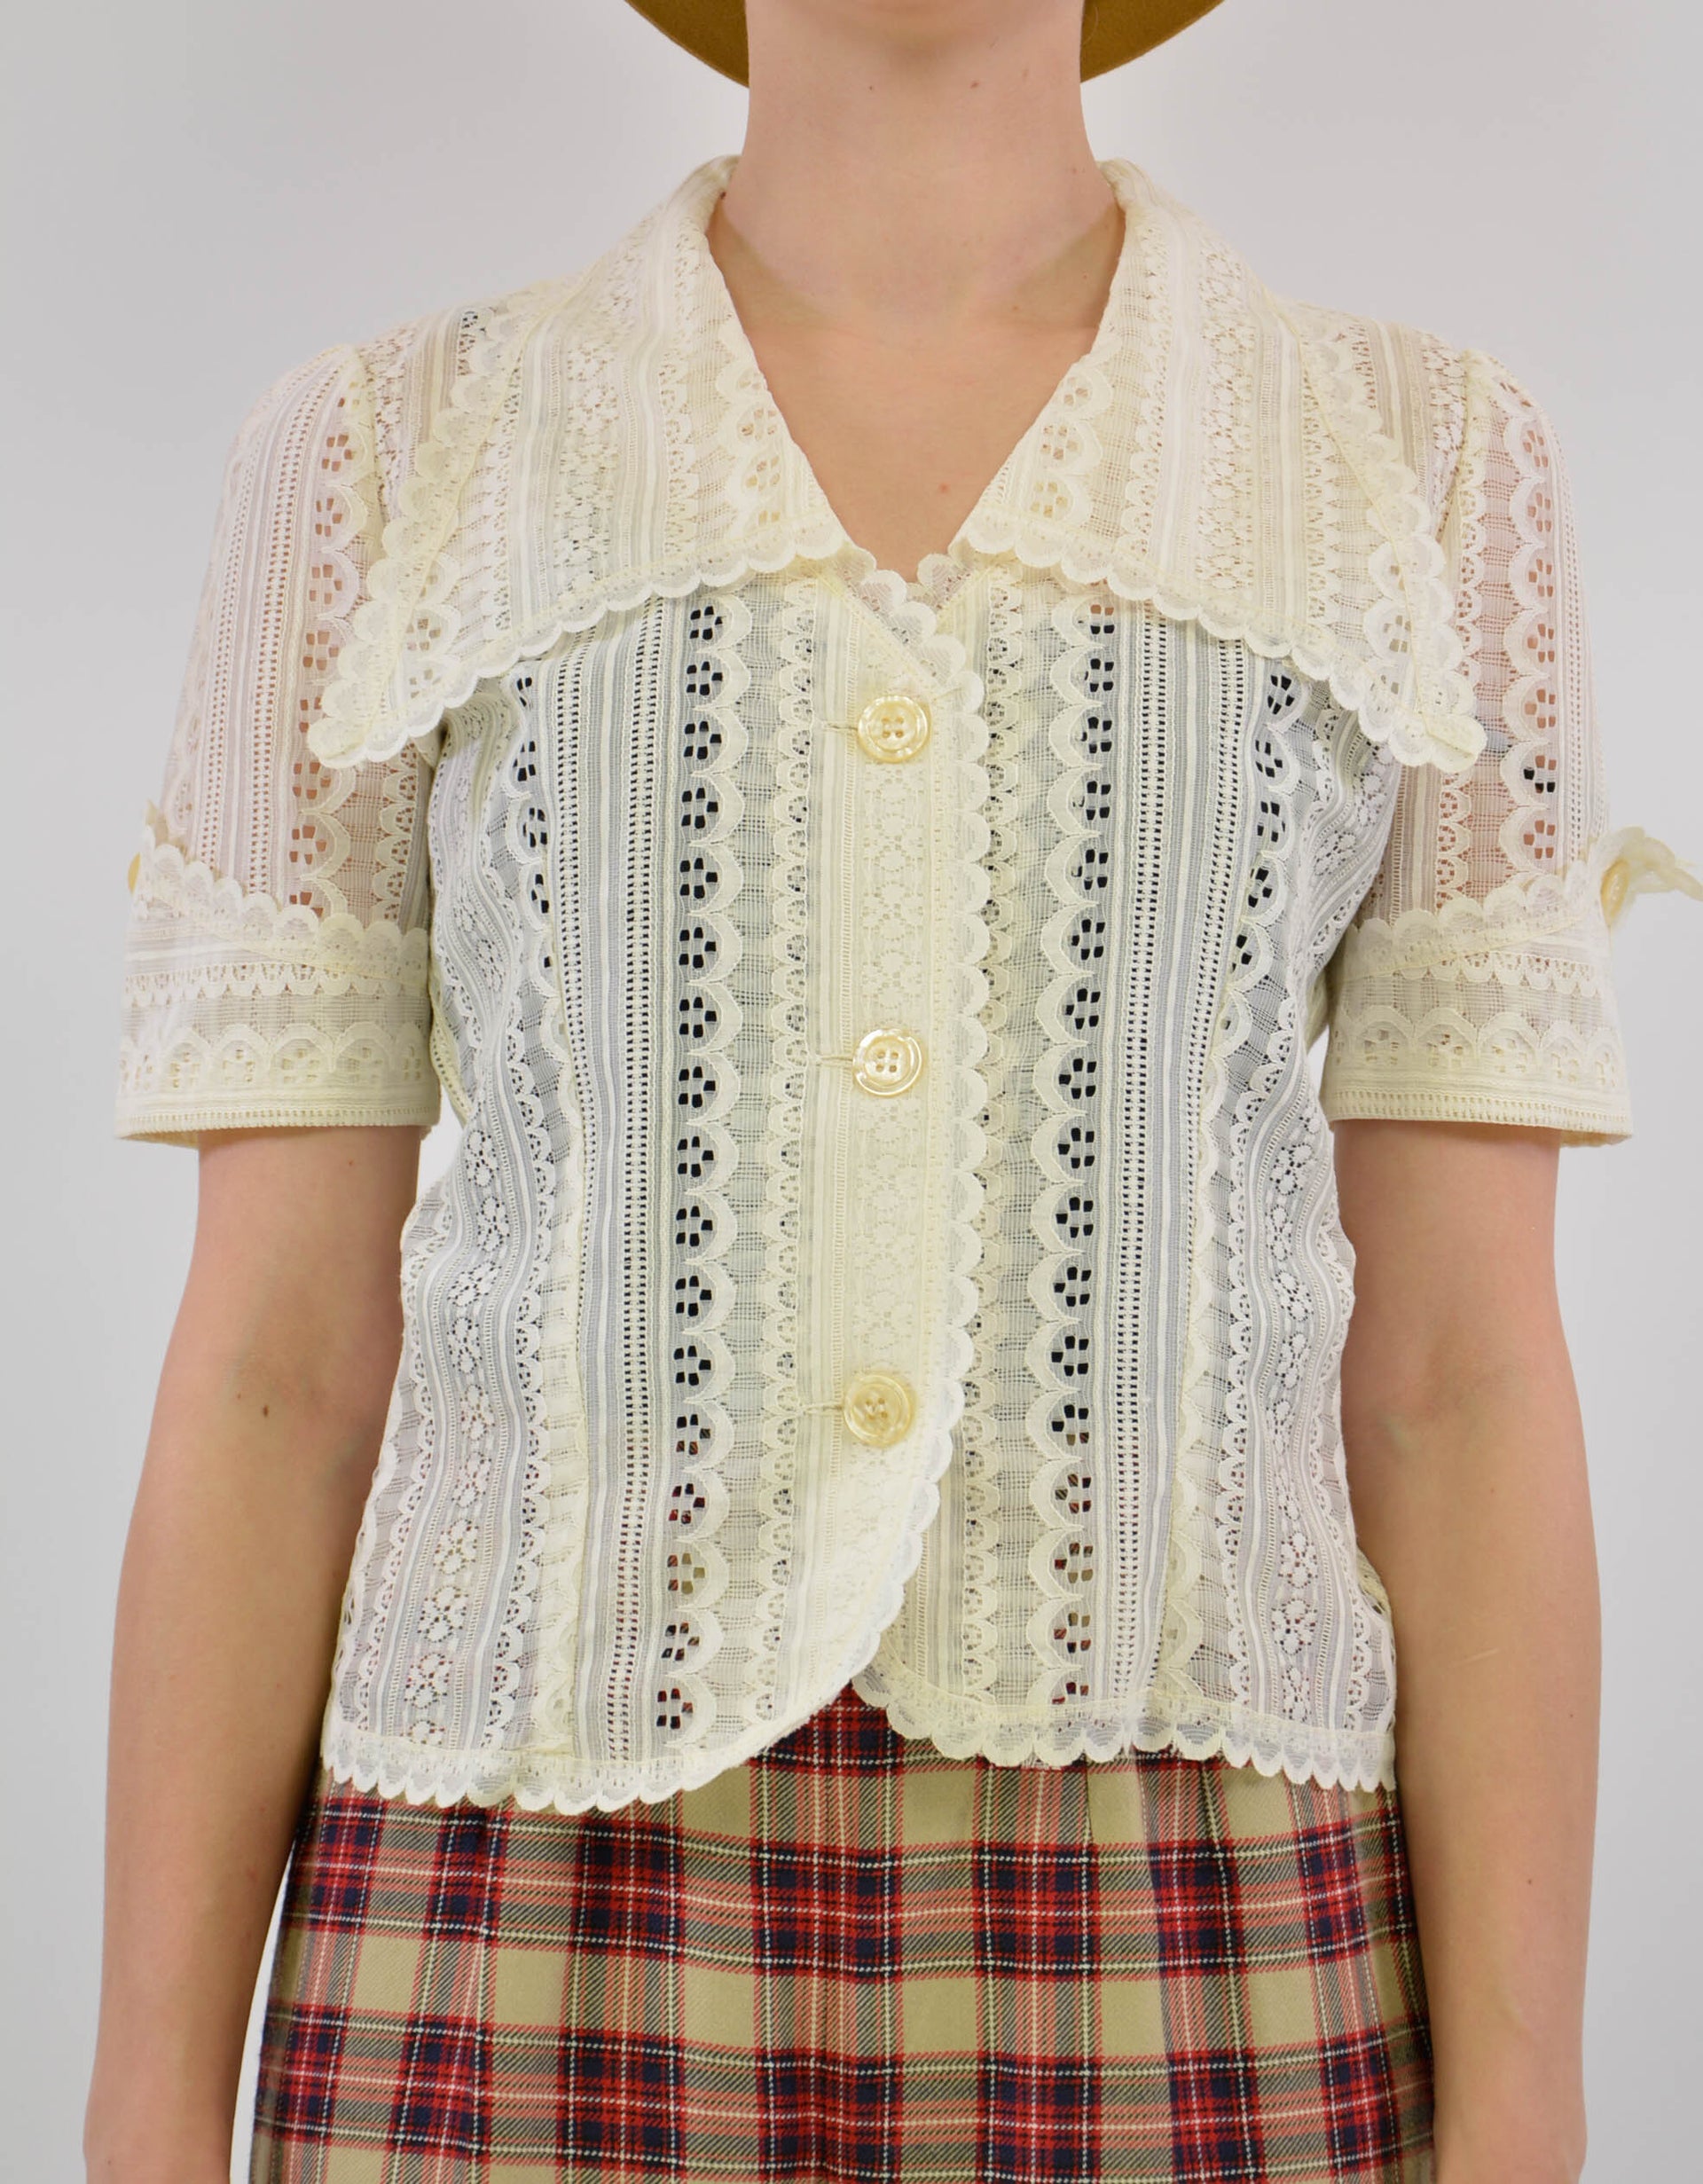 Embroidered blouse - PICKNWEIGHT - VINTAGE KILO STORE